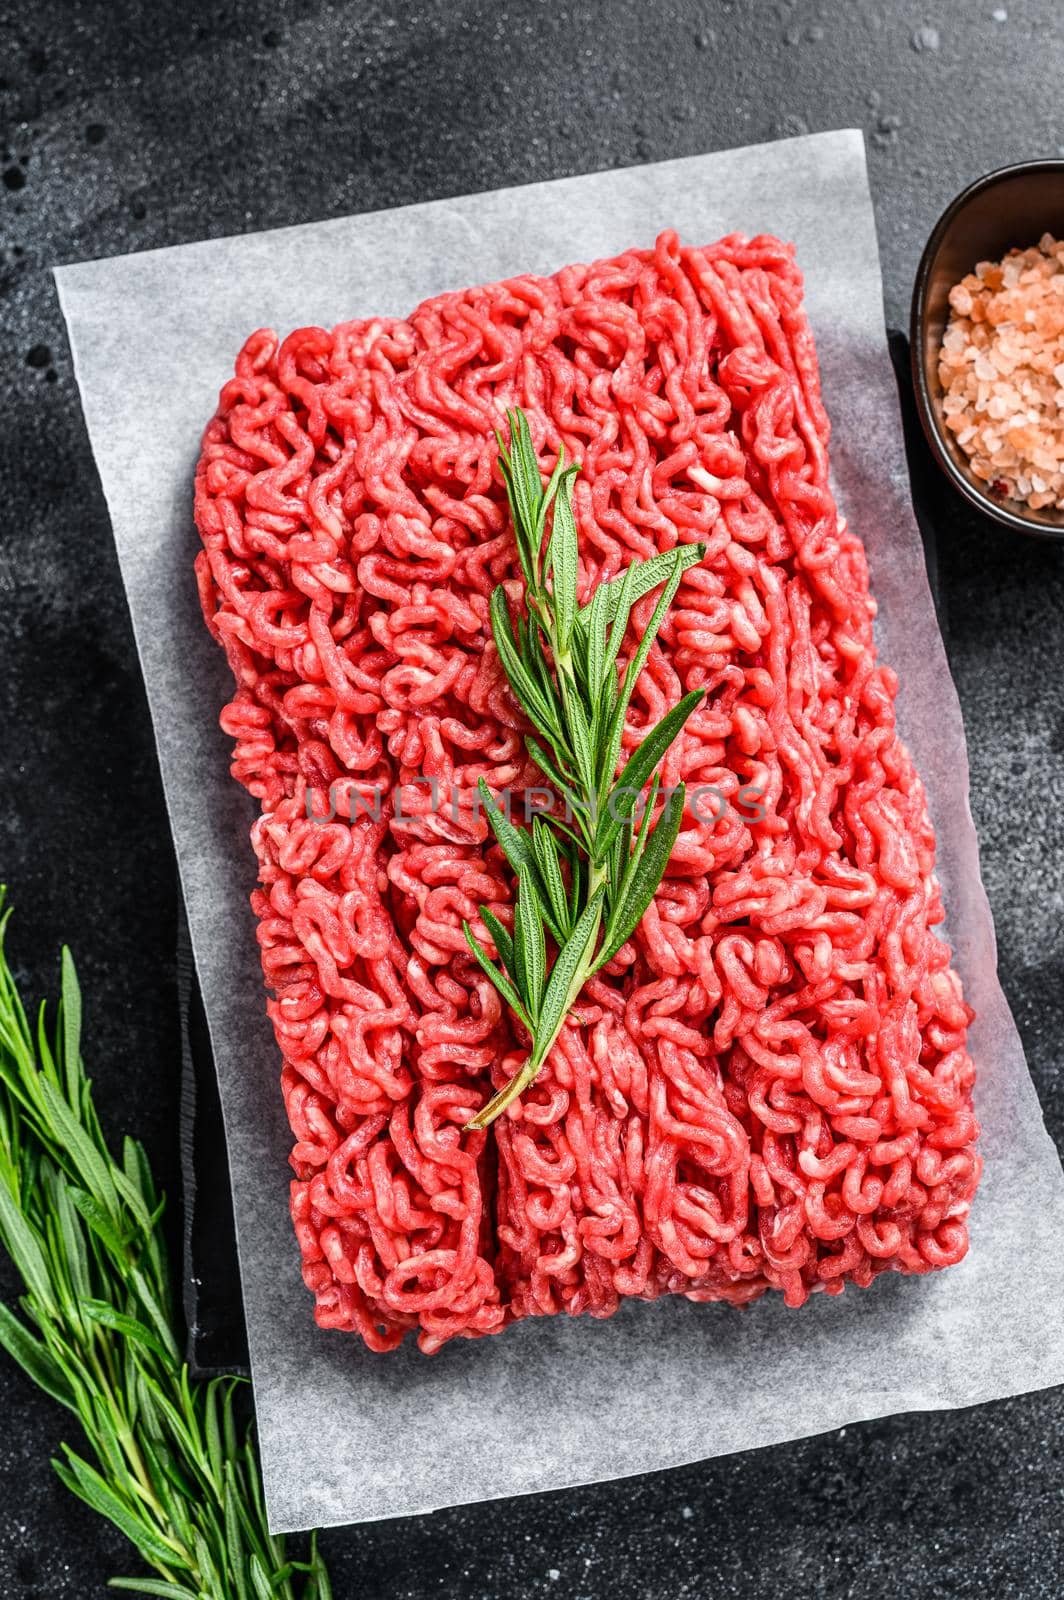 Fresh Raw mince beef, ground meat on butcher paper. Black background. Top view.